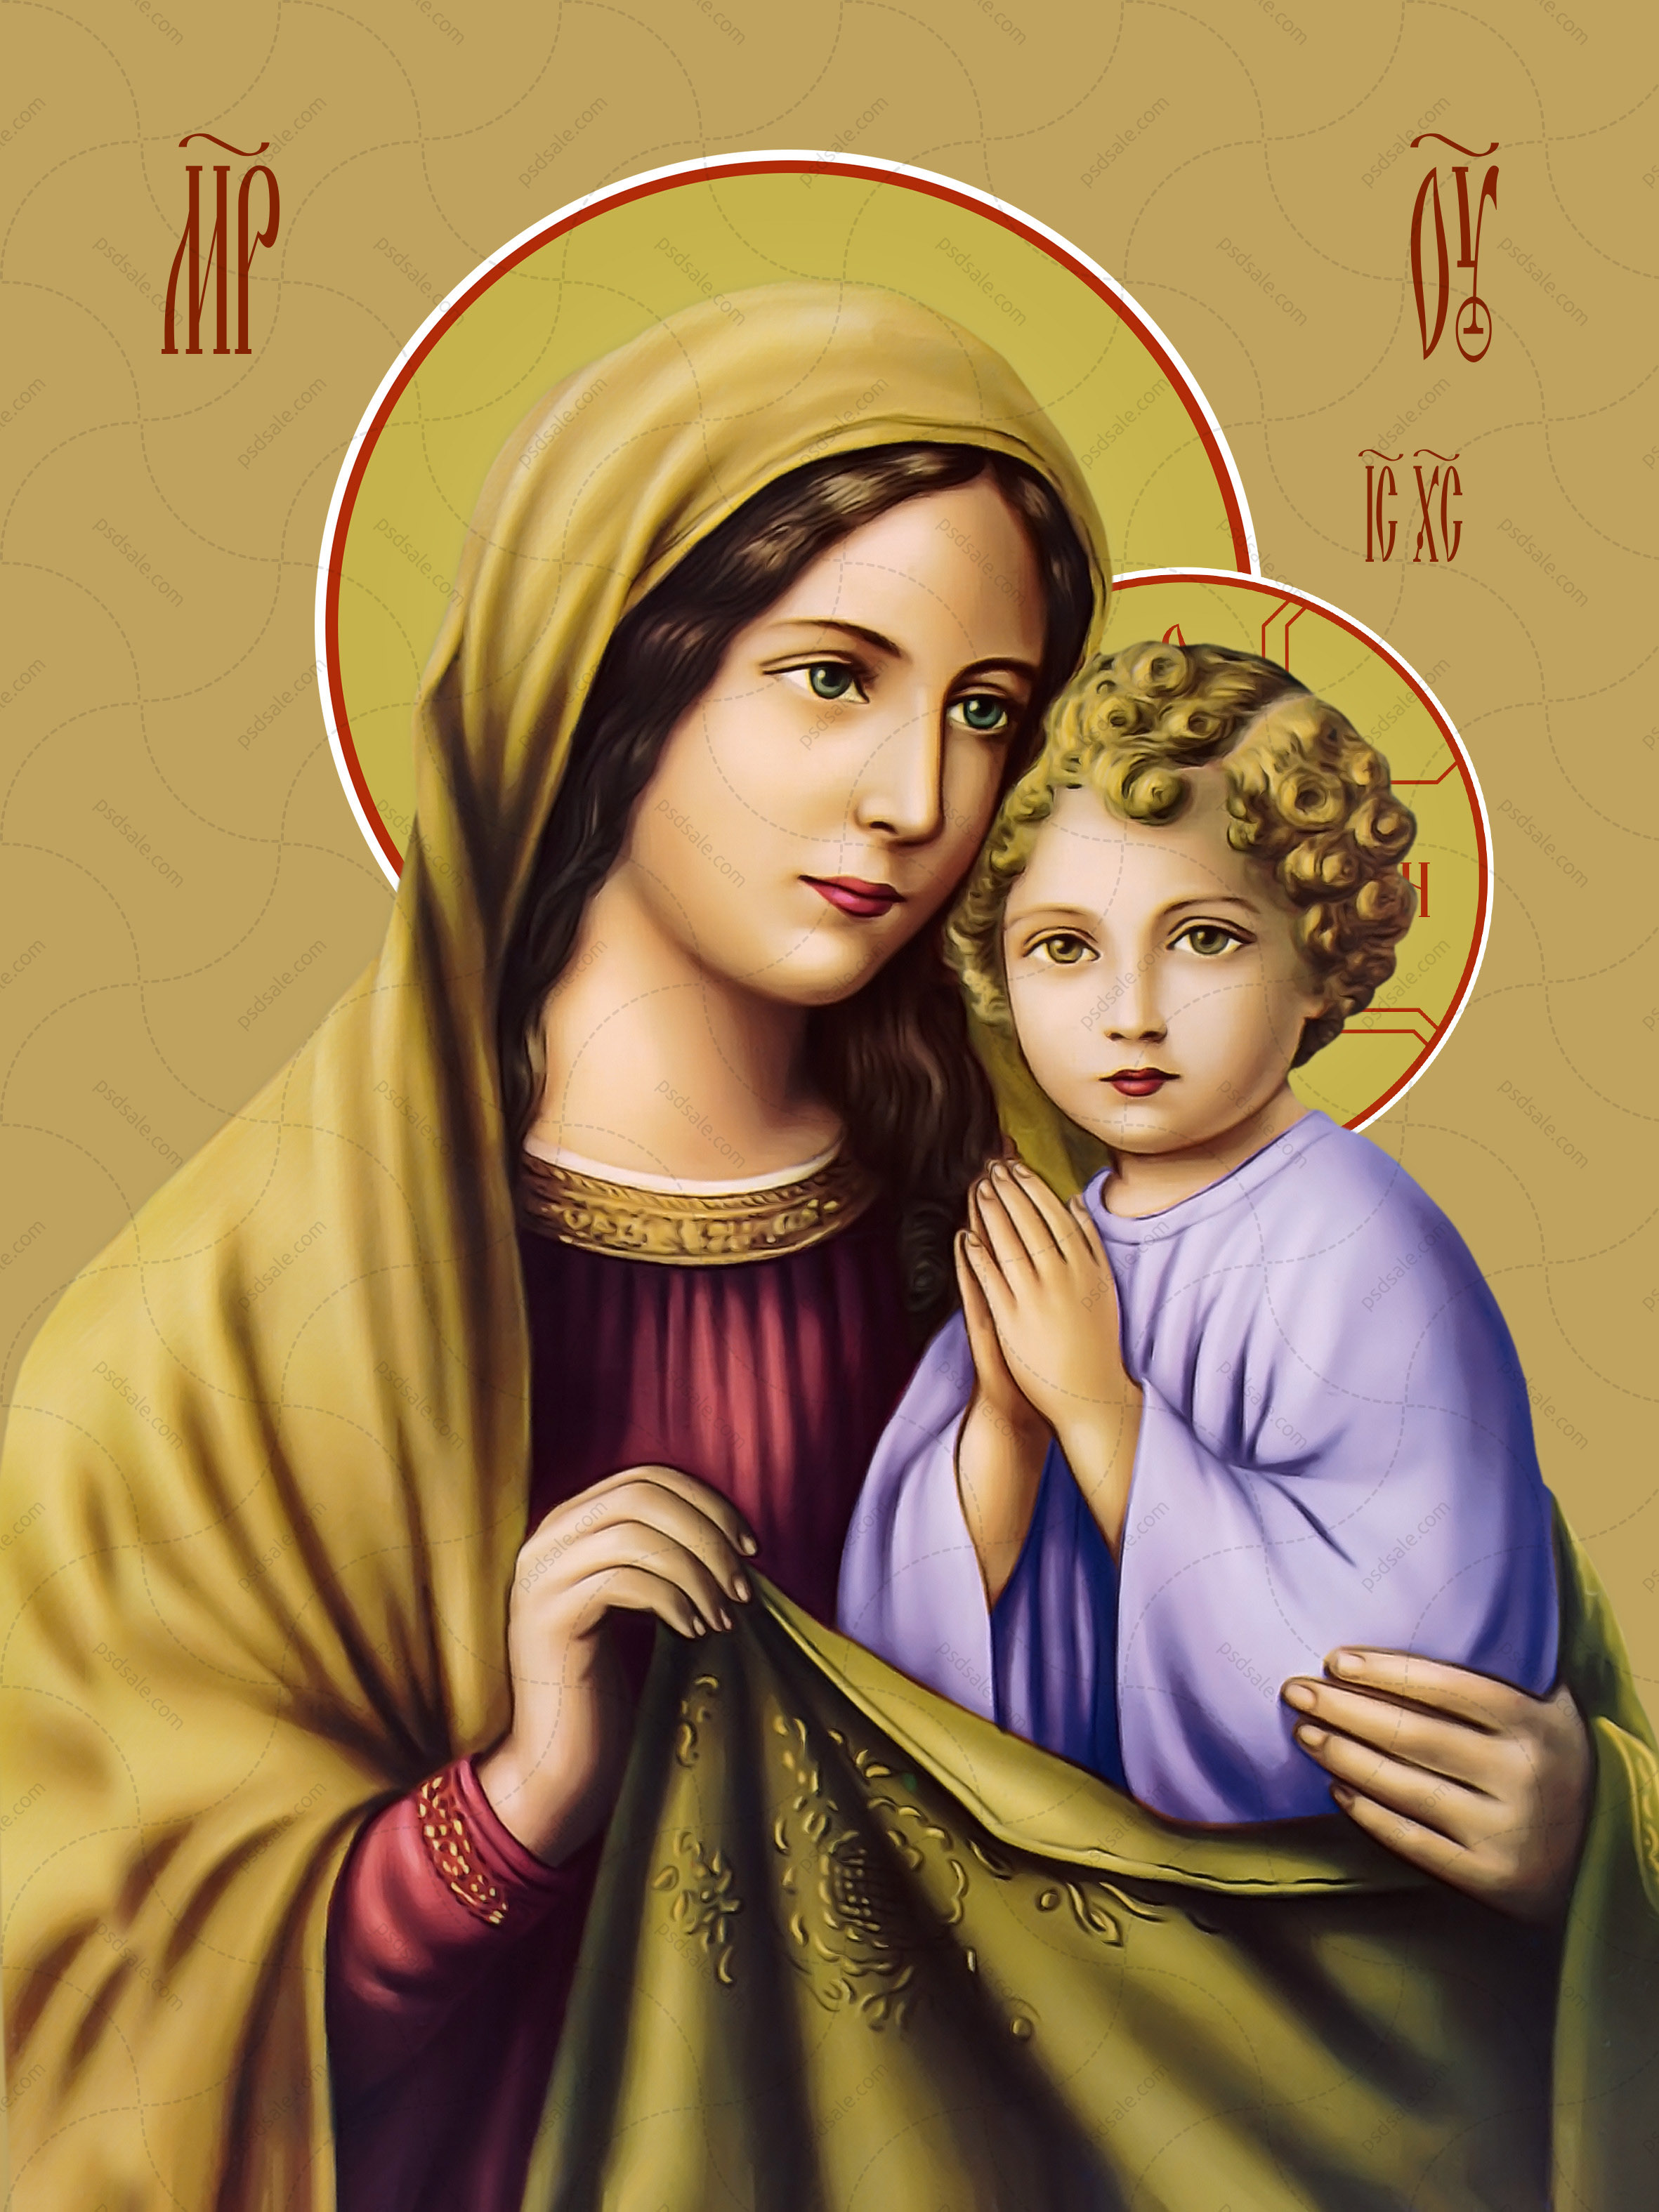 Virgin　the　Buy　image　and　icon:　of　Mary　Blessed　Child